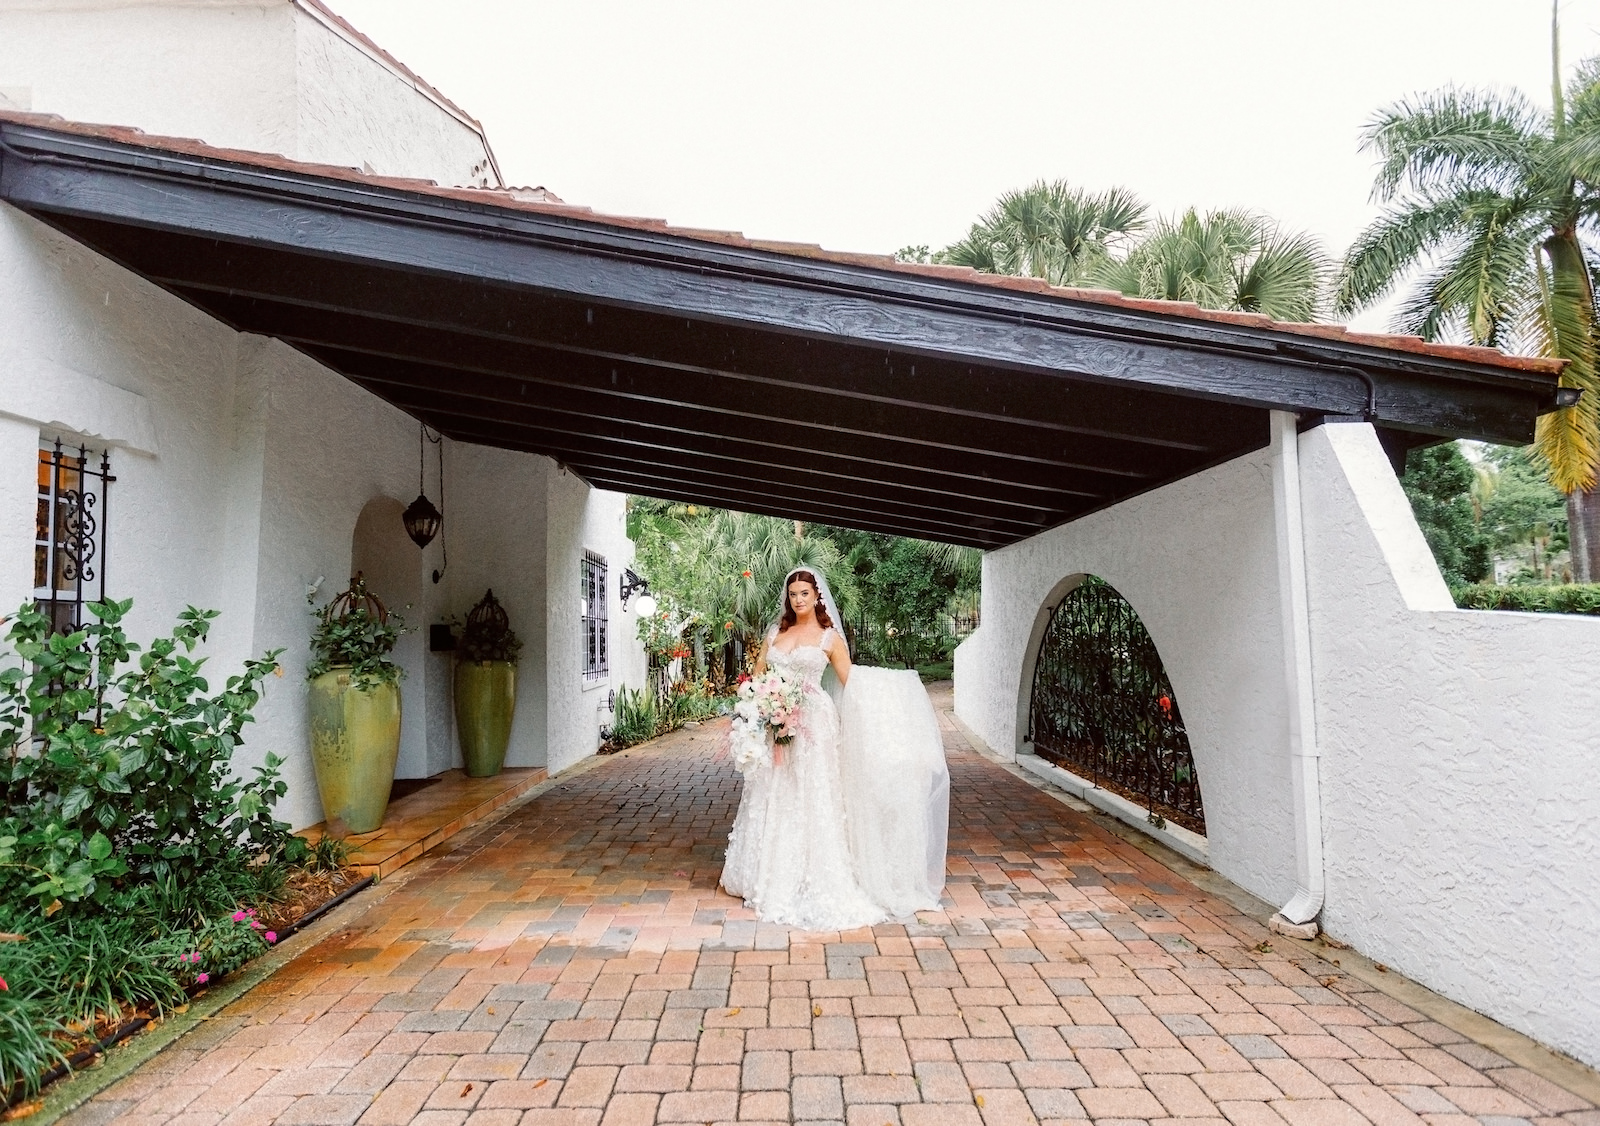 Fairytale Red and Pink Private Residence Wedding, Bride Wedding Portrait | Tampa Bay Wedding Photographer Dewitt for Love Photography